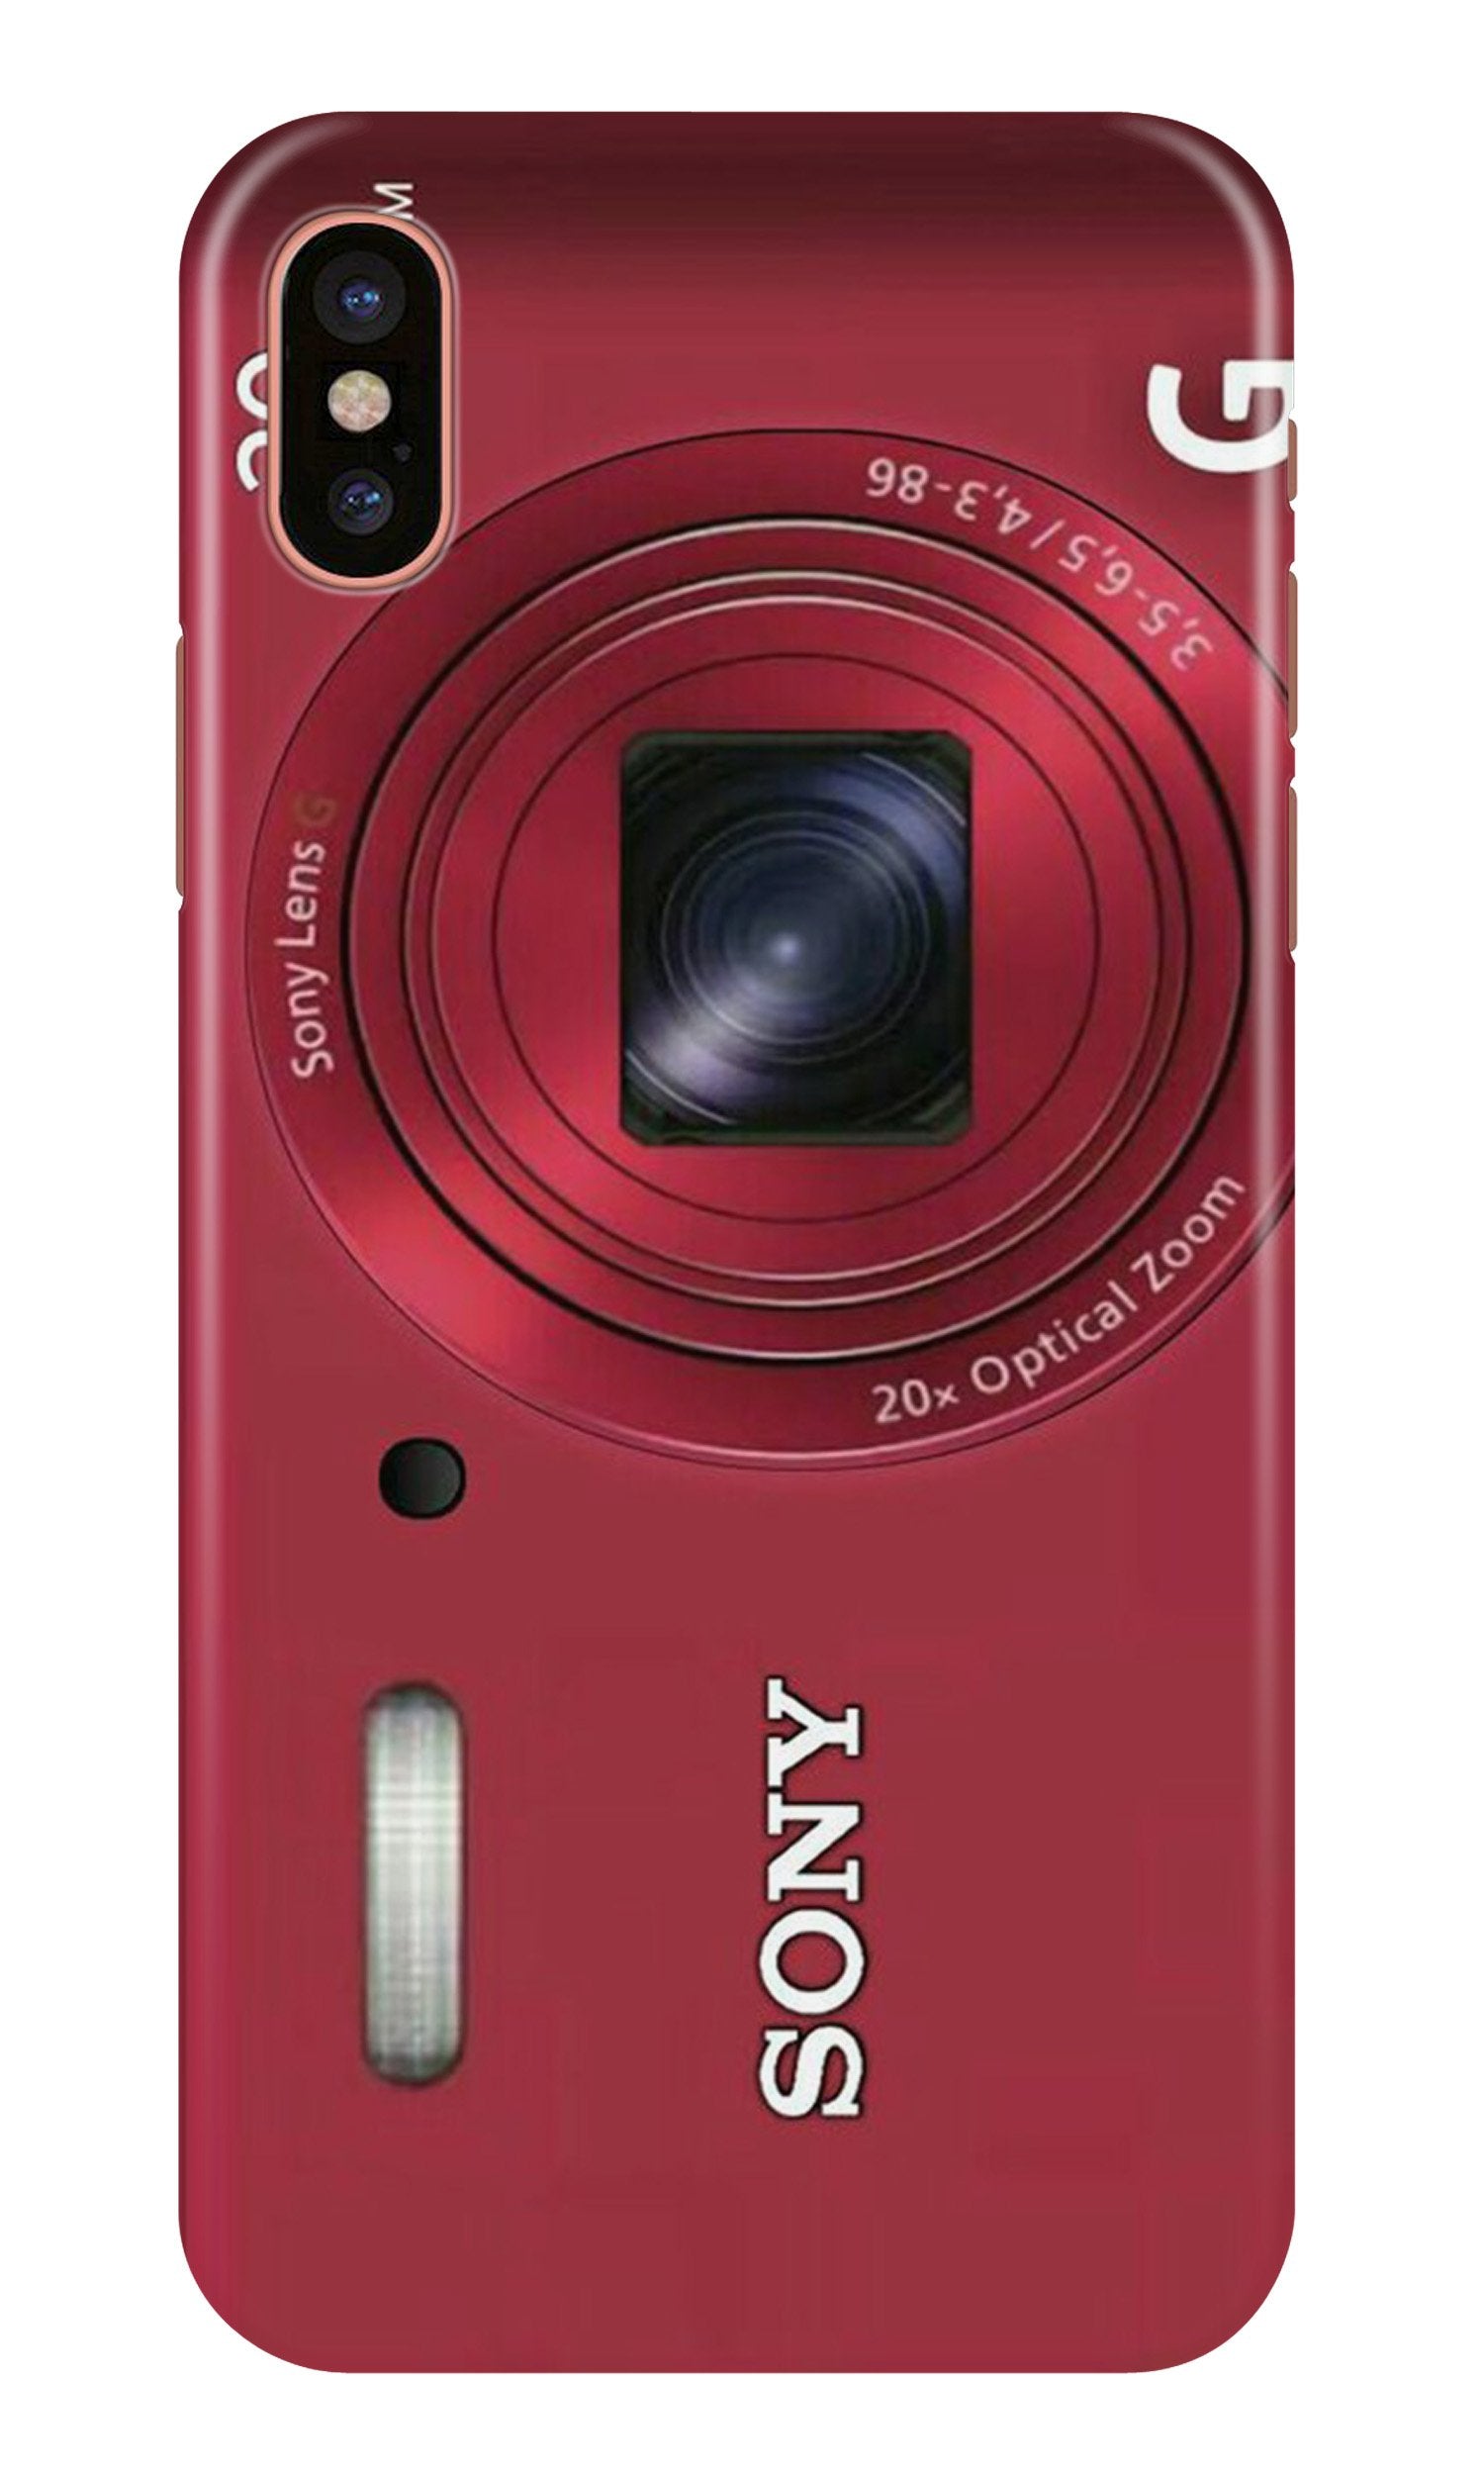 Sony Case for iPhone Xr (Design No. 274)